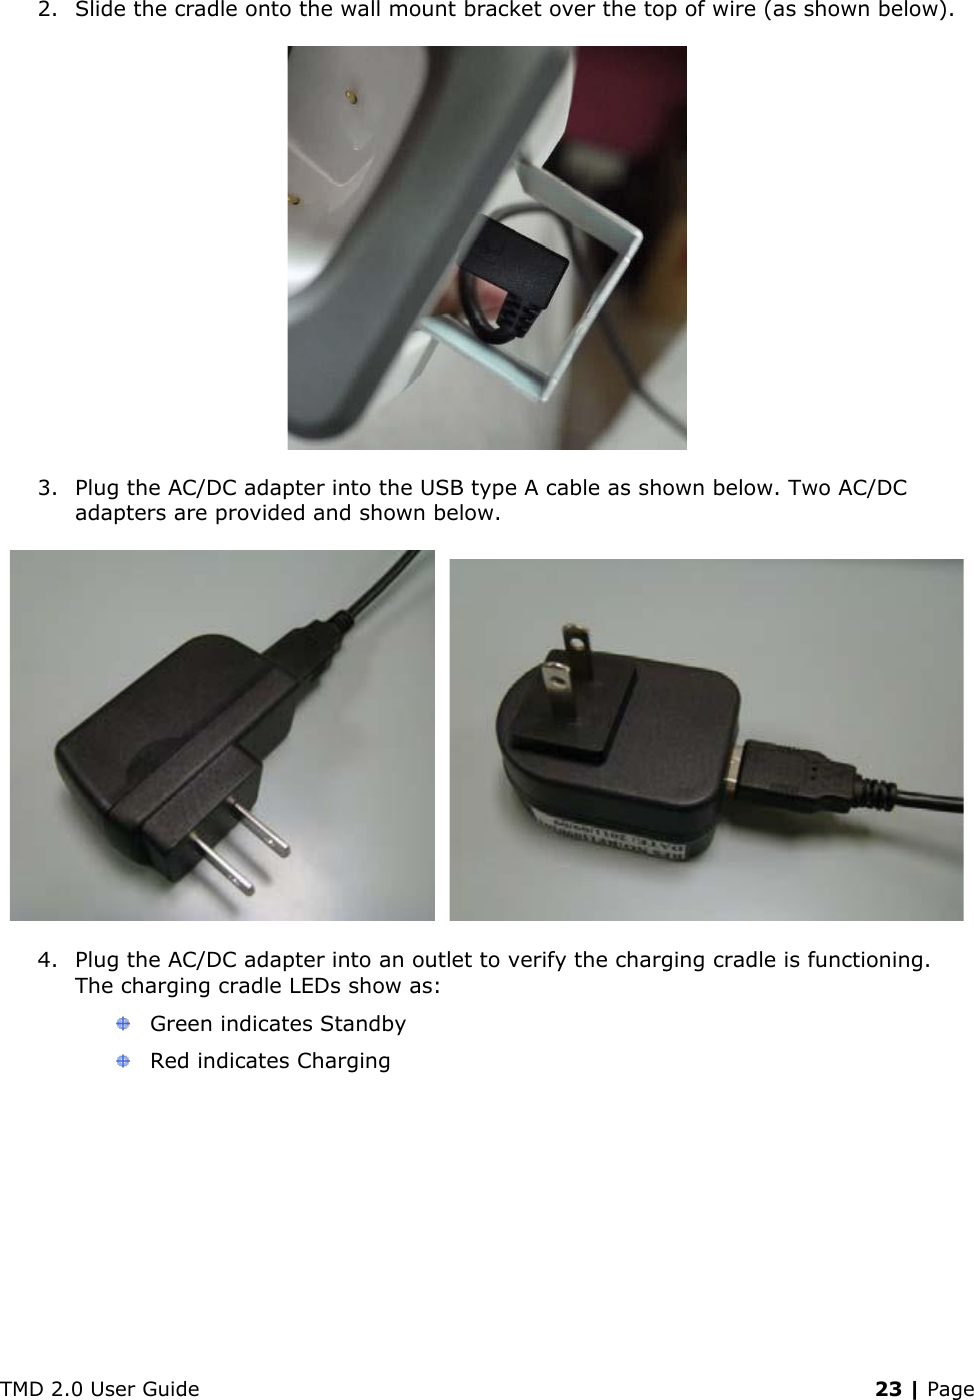 TMD 2.0 User Guide    23 | Page 2. Slide the cradle onto the wall mount bracket over the top of wire (as shown below).  3. Plug the AC/DC adapter into the USB type A cable as shown below. Two AC/DC adapters are provided and shown below.     4. Plug the AC/DC adapter into an outlet to verify the charging cradle is functioning. The charging cradle LEDs show as:   Green indicates Standby  Red indicates Charging 